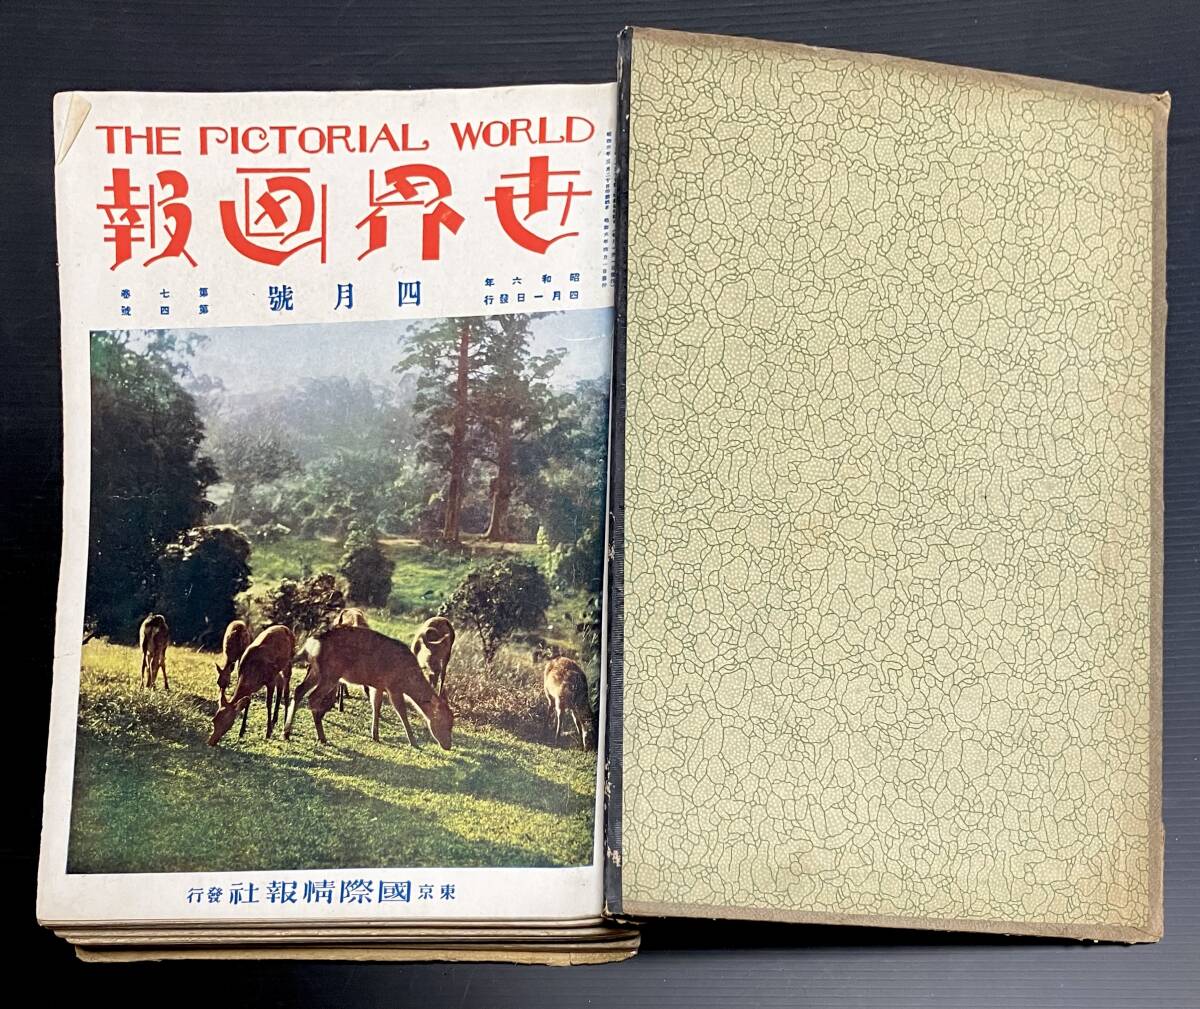 No.14 世界画報(THE PICTORIAL WORLD) 昭和6年4月〜12月号、昭和7年1月〜12月、昭和9年1月〜12月破れページ欠落汚れヤケカビ臭折れありの画像3